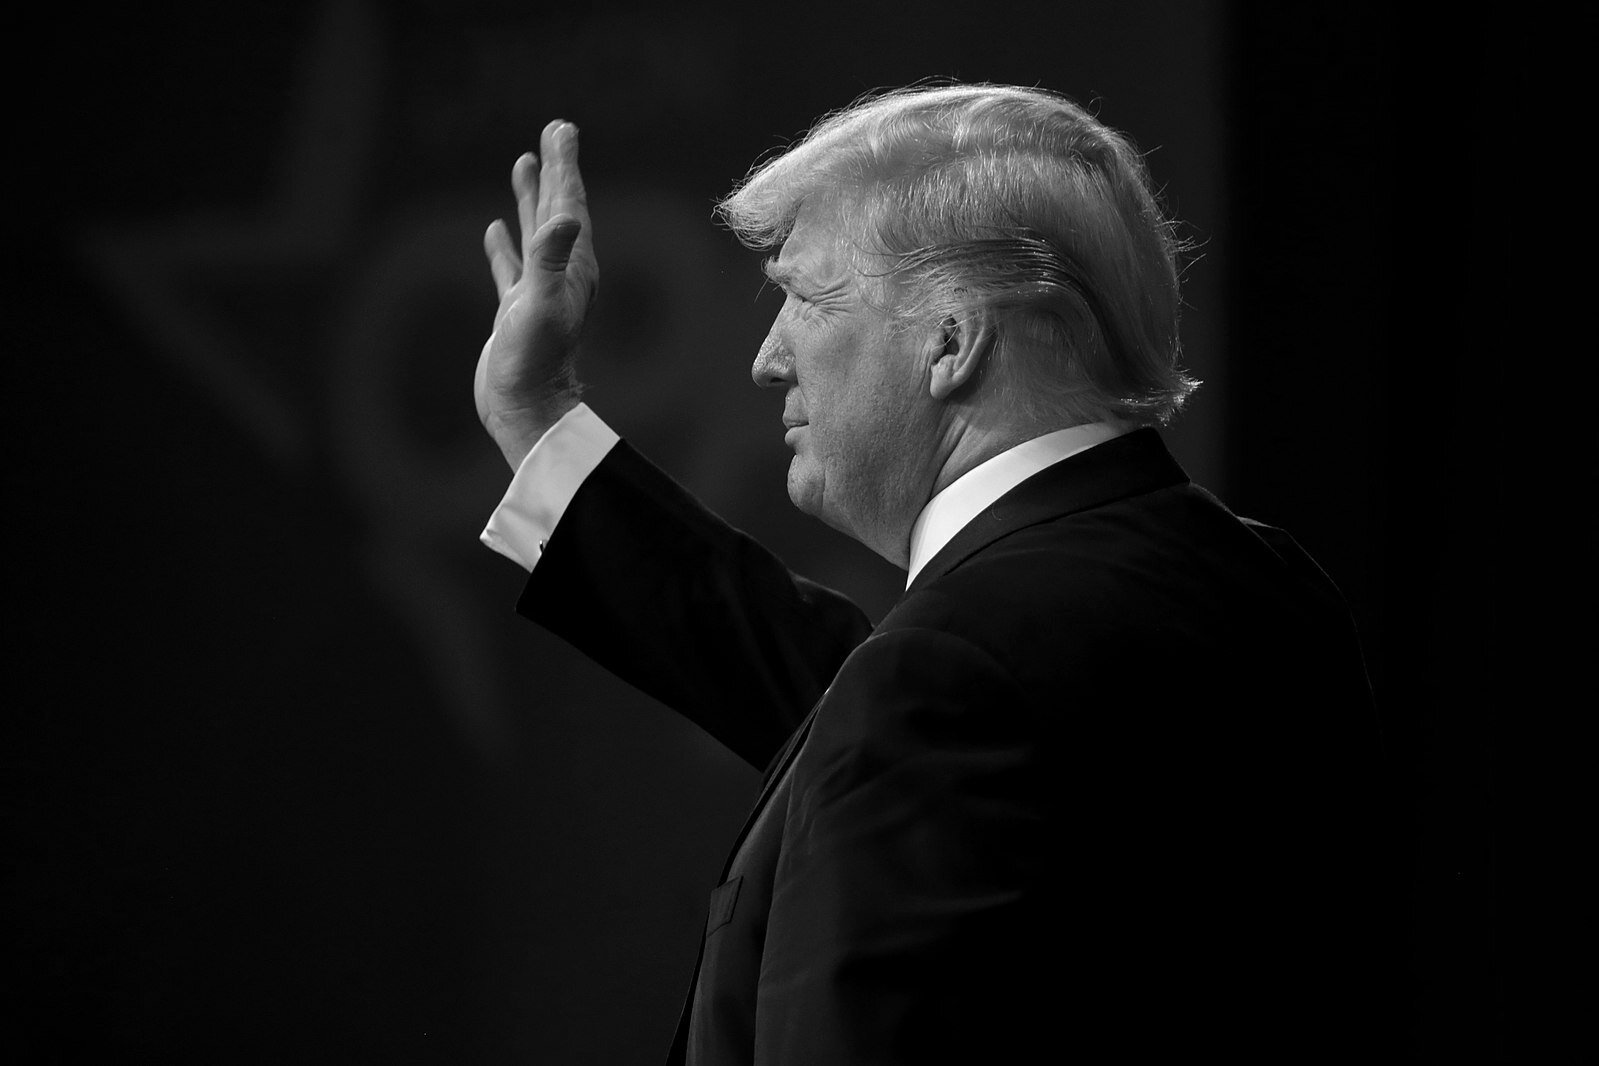 President of the United States Donald Trump speaking at the 2018 Conservative Political Action Conference (CPAC) in National Harbor, Maryland. (Photo by Gage Skidmore)